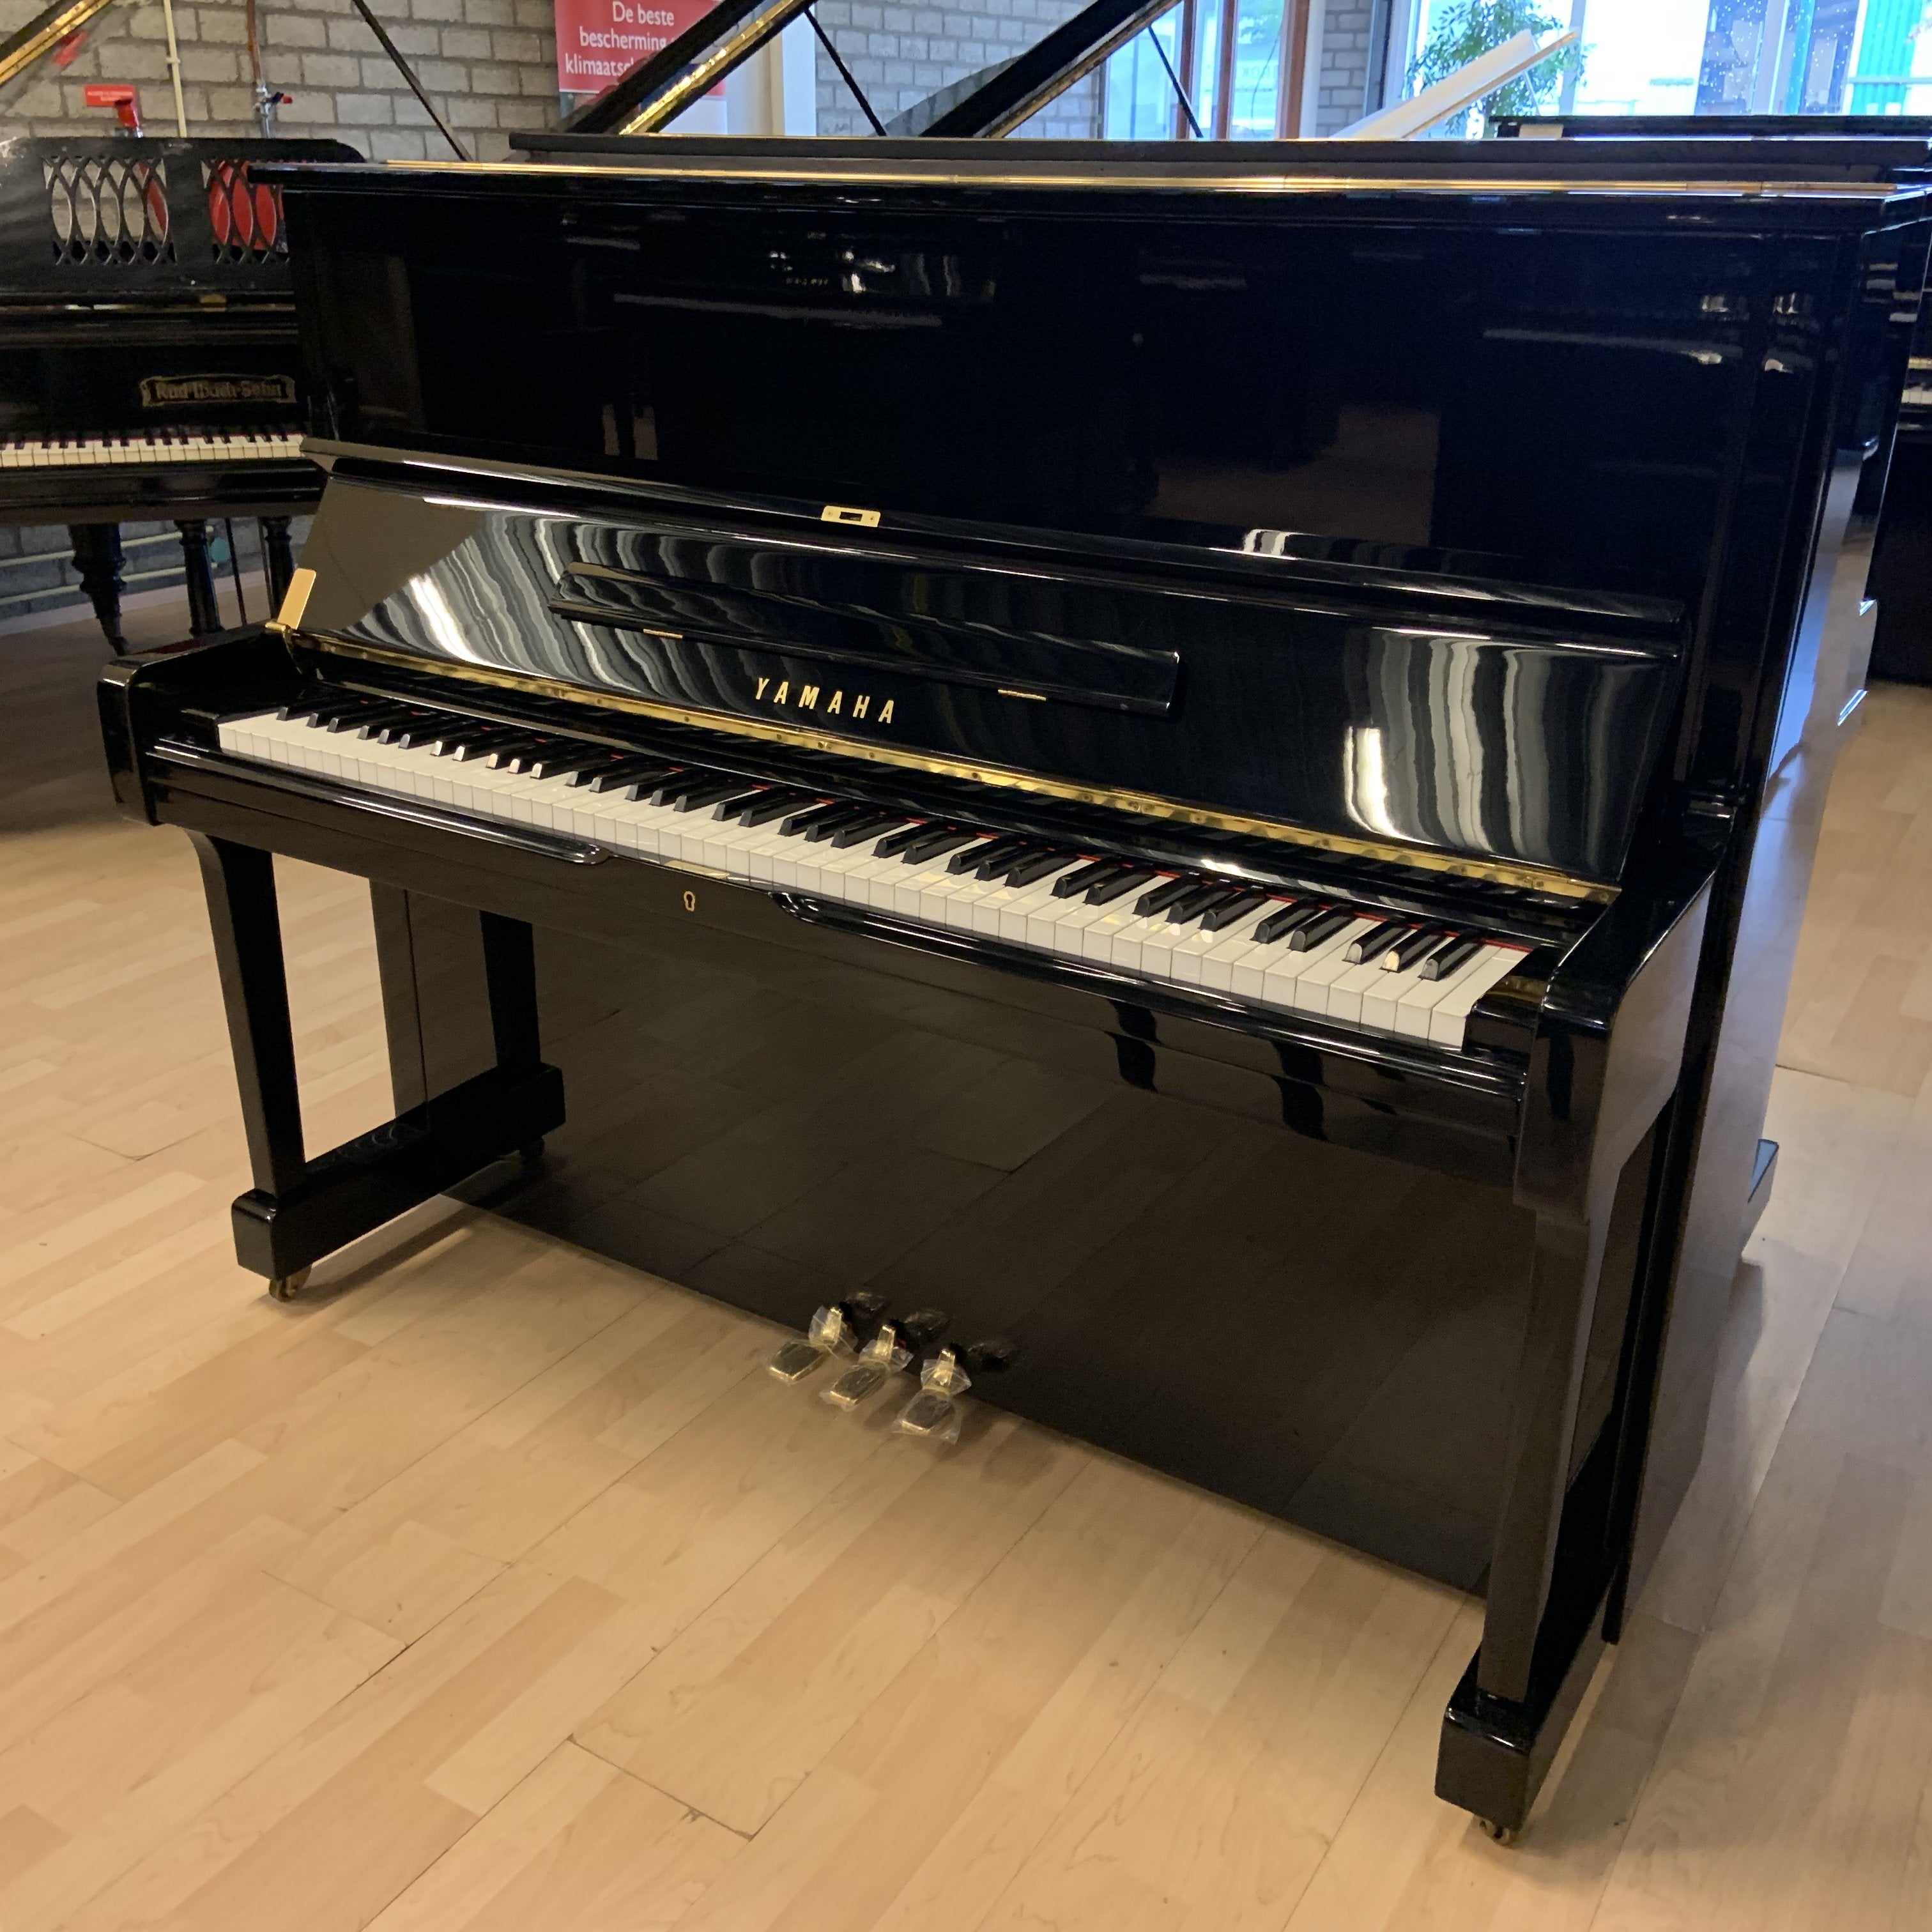 yamaha piano serial number search europe